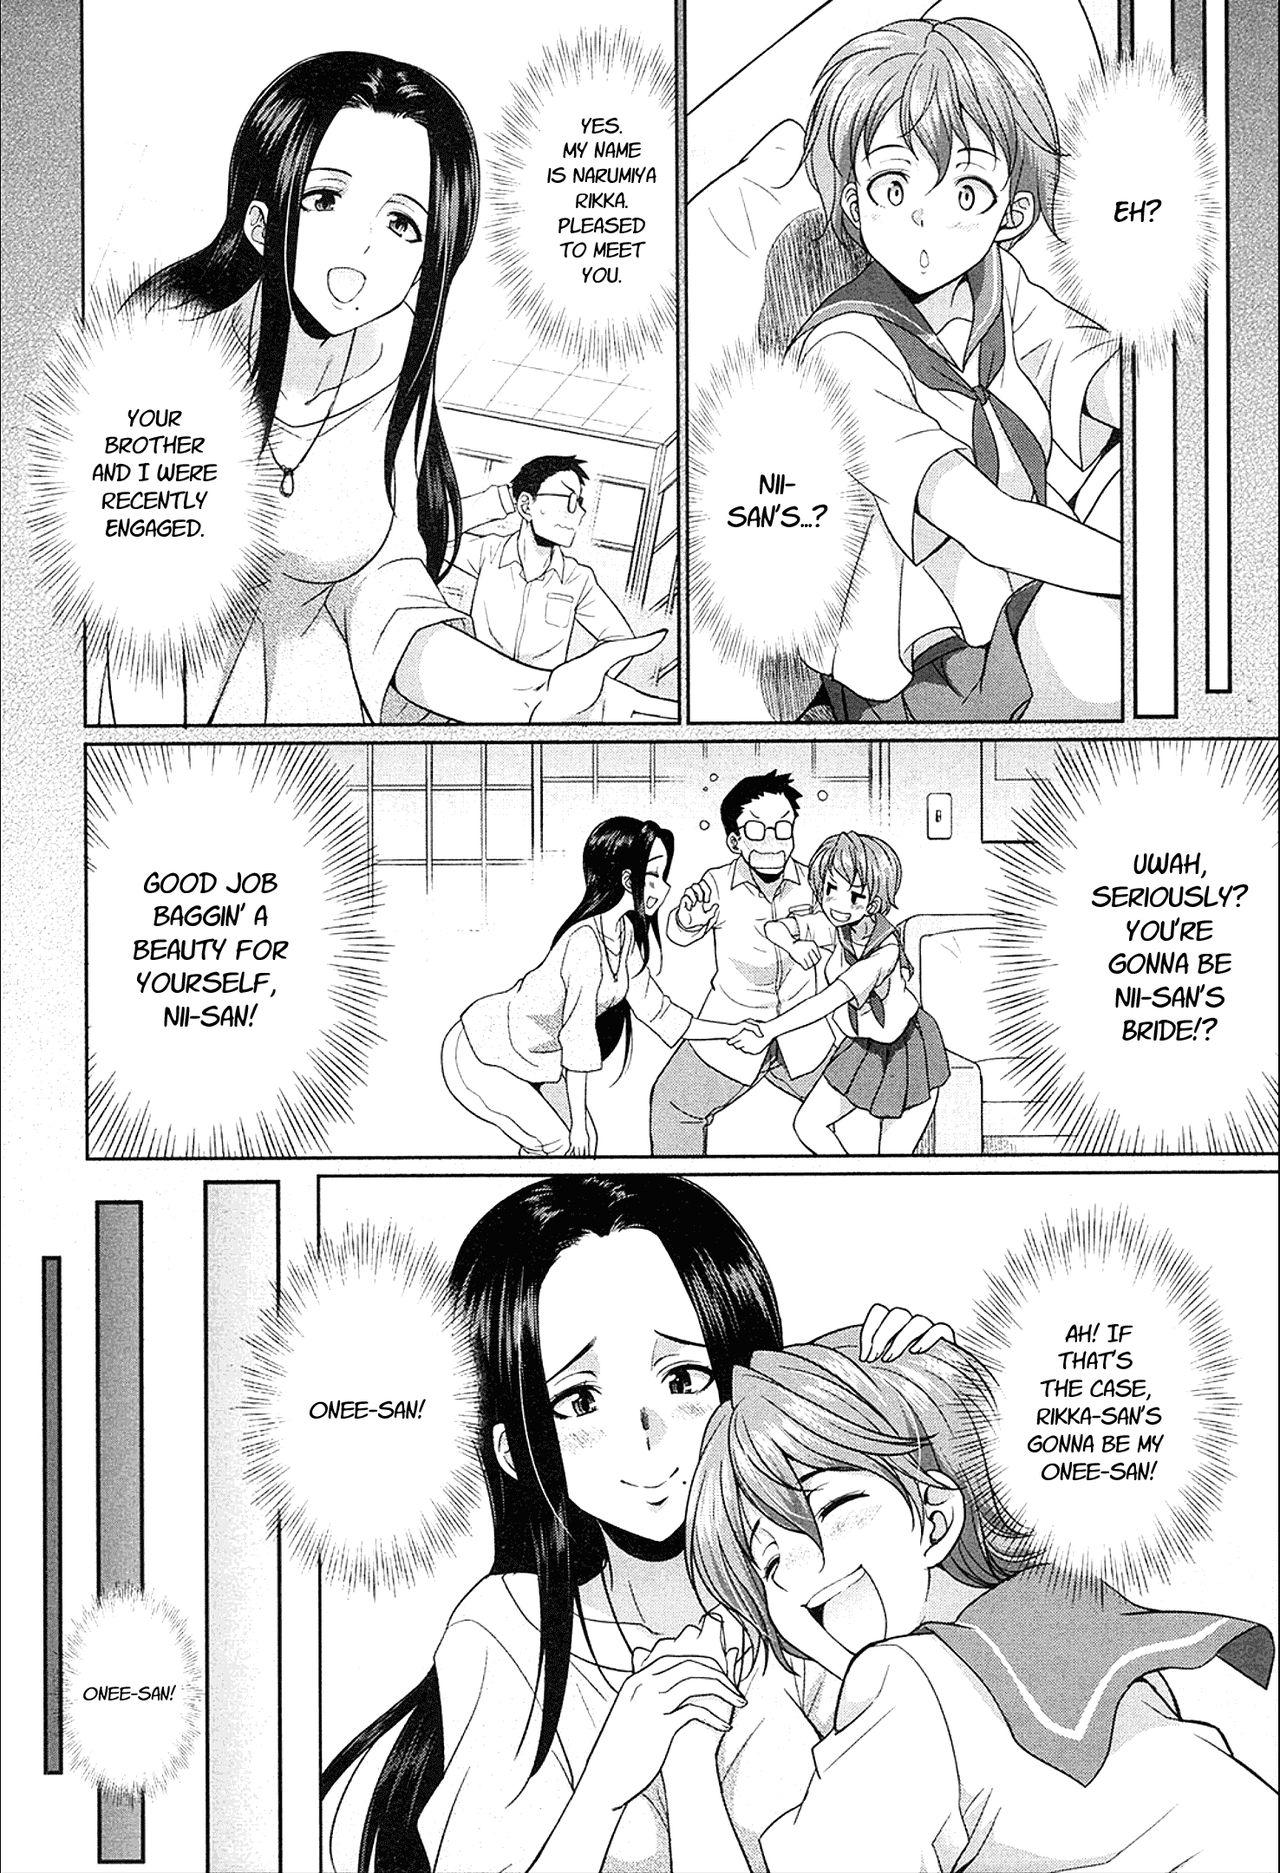 White Gishimai no Kankei The Relationship of the Sisters-in-Law Original Script Uncensored Tight Ass - Page 4